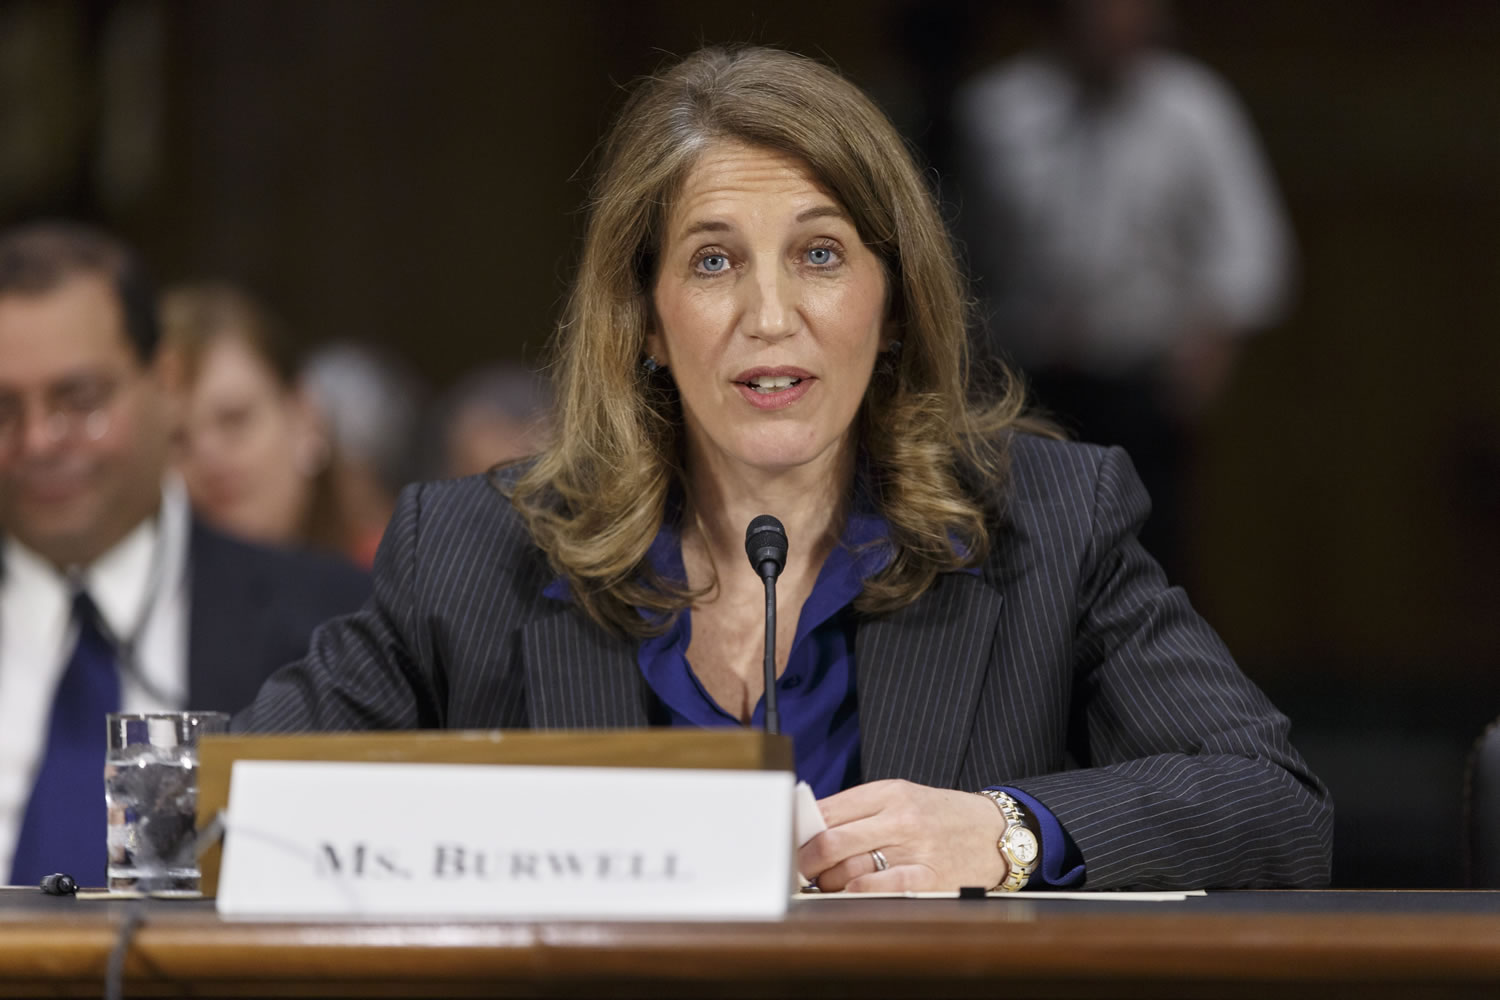 Sylvia Mathews Burwell, President Barack Obama's nominee to become secretary of Health and Human Services, appears before the Senate Health, Education, Labor and Pensions Committee for her confirmation hearing on Capitol Hill in Washington on Thursday.